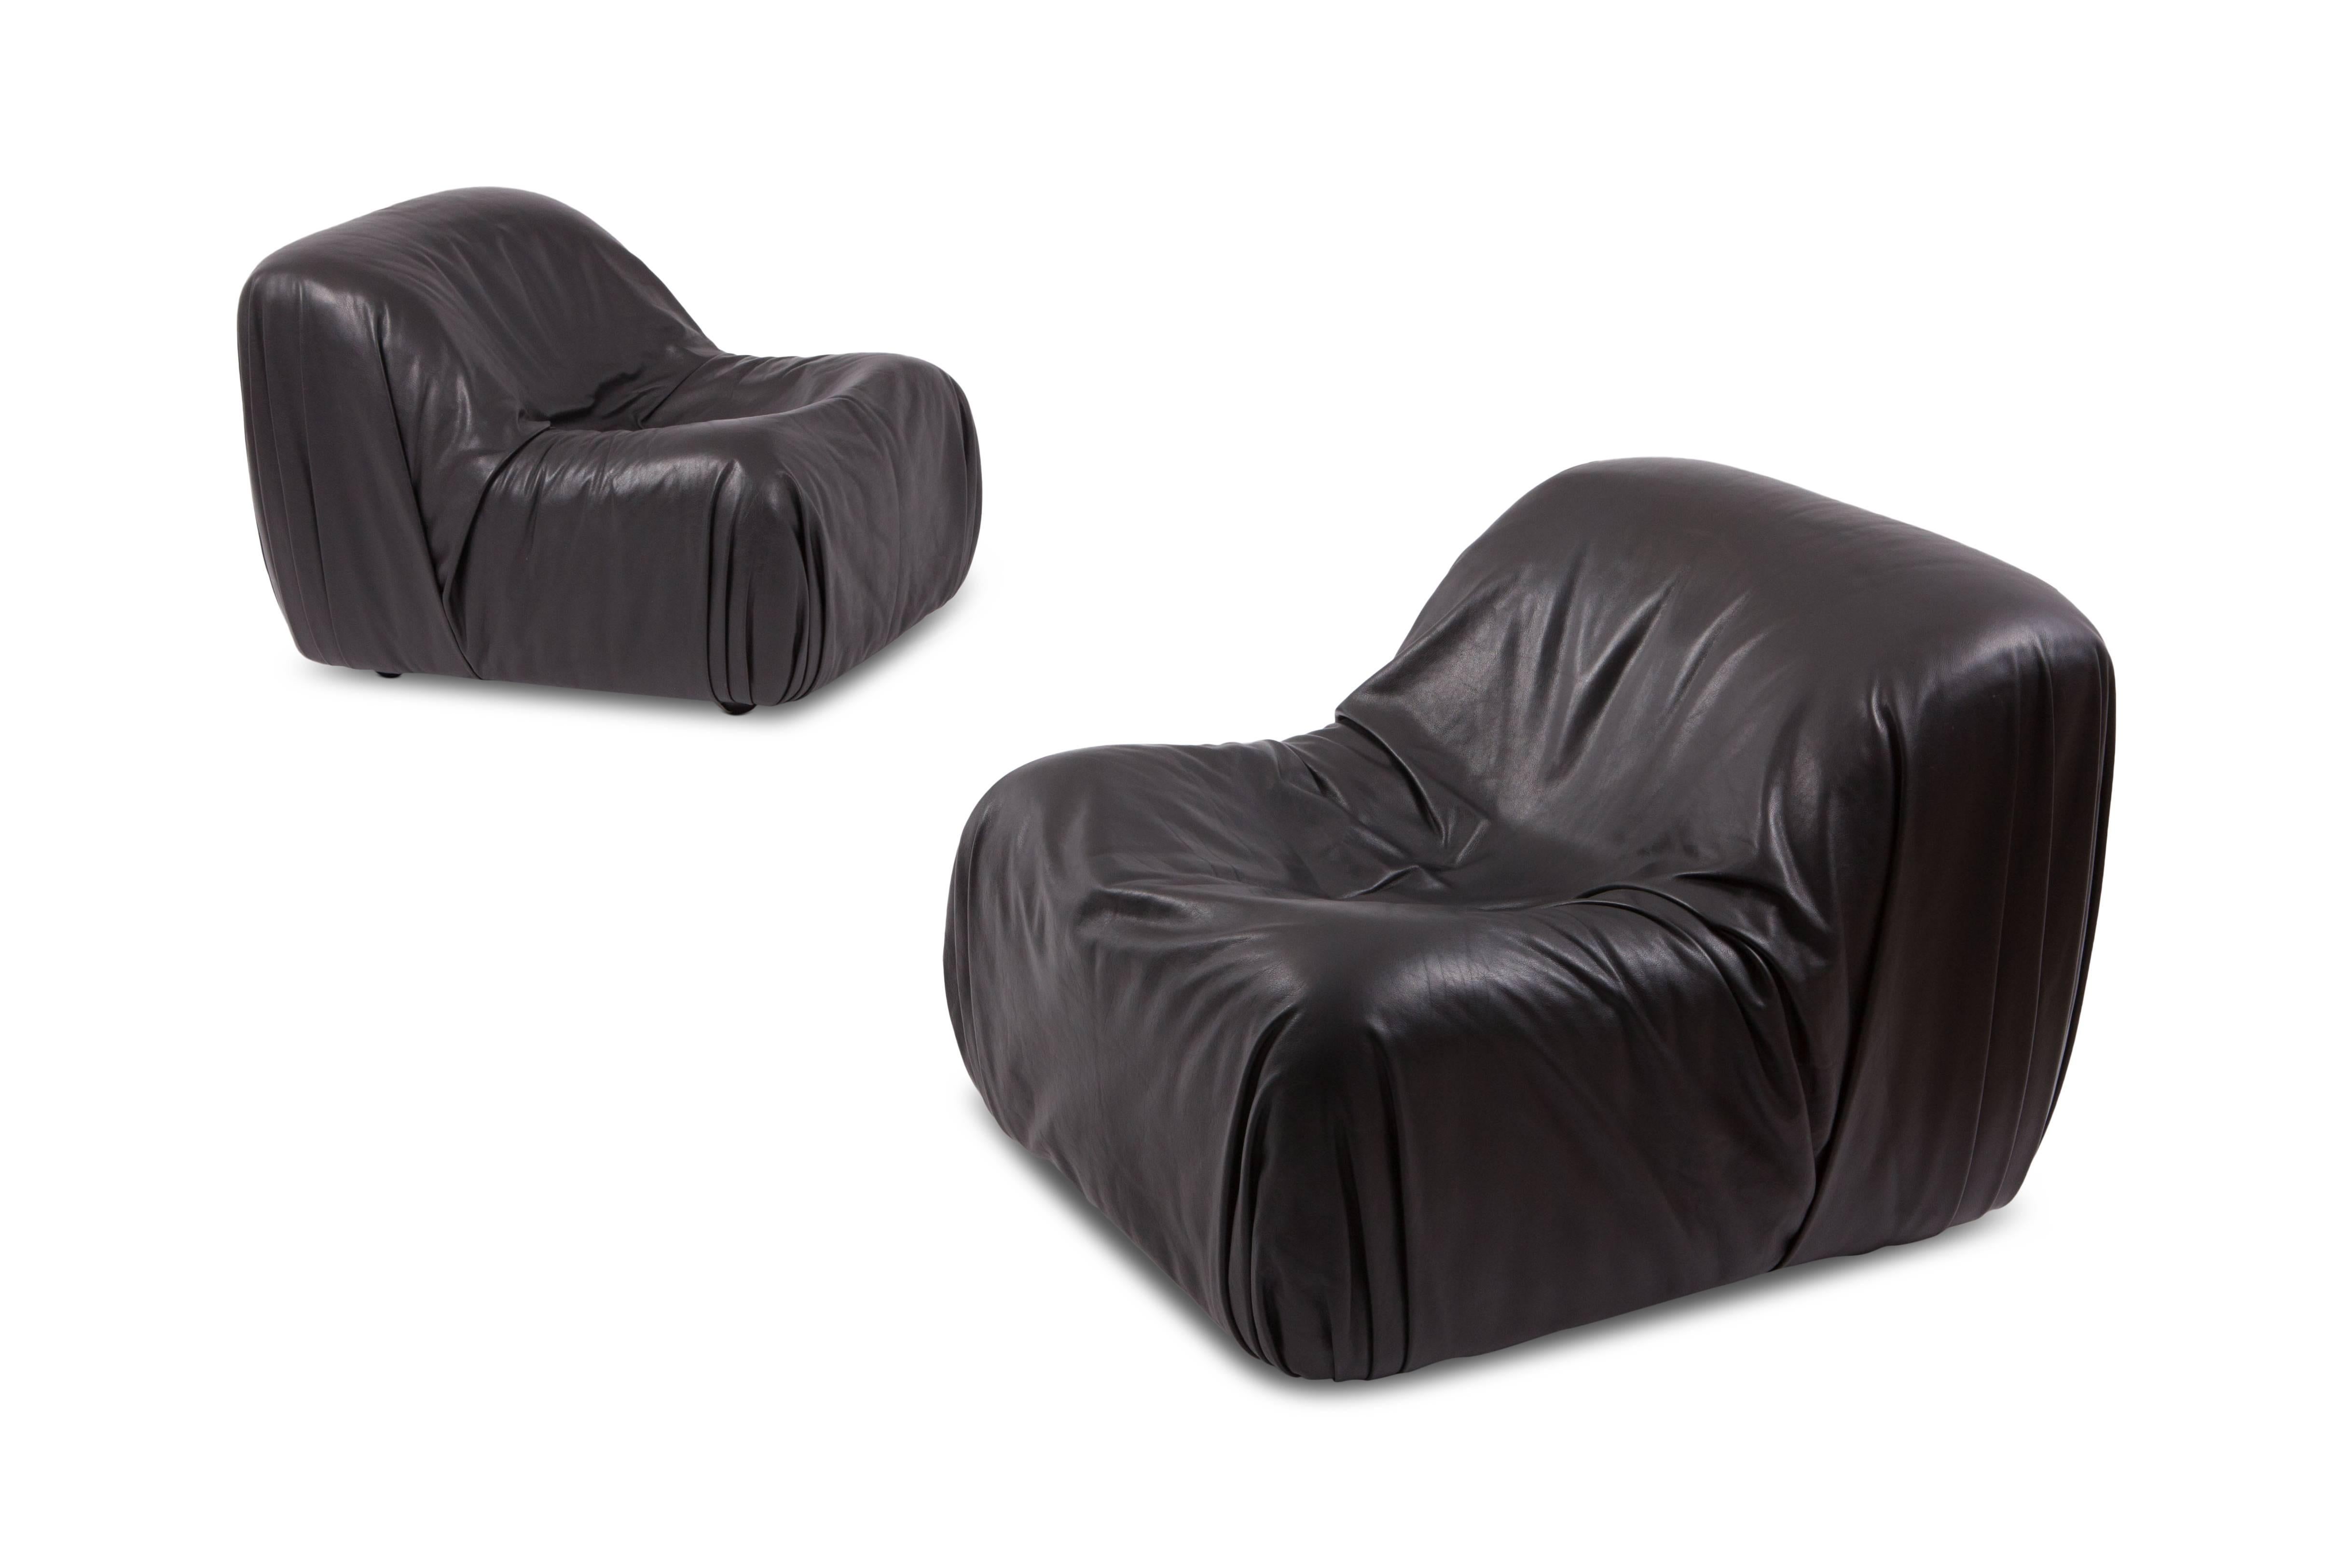 Swiss De Sede DS 41 Lounge Chair in High Quality Black Leather